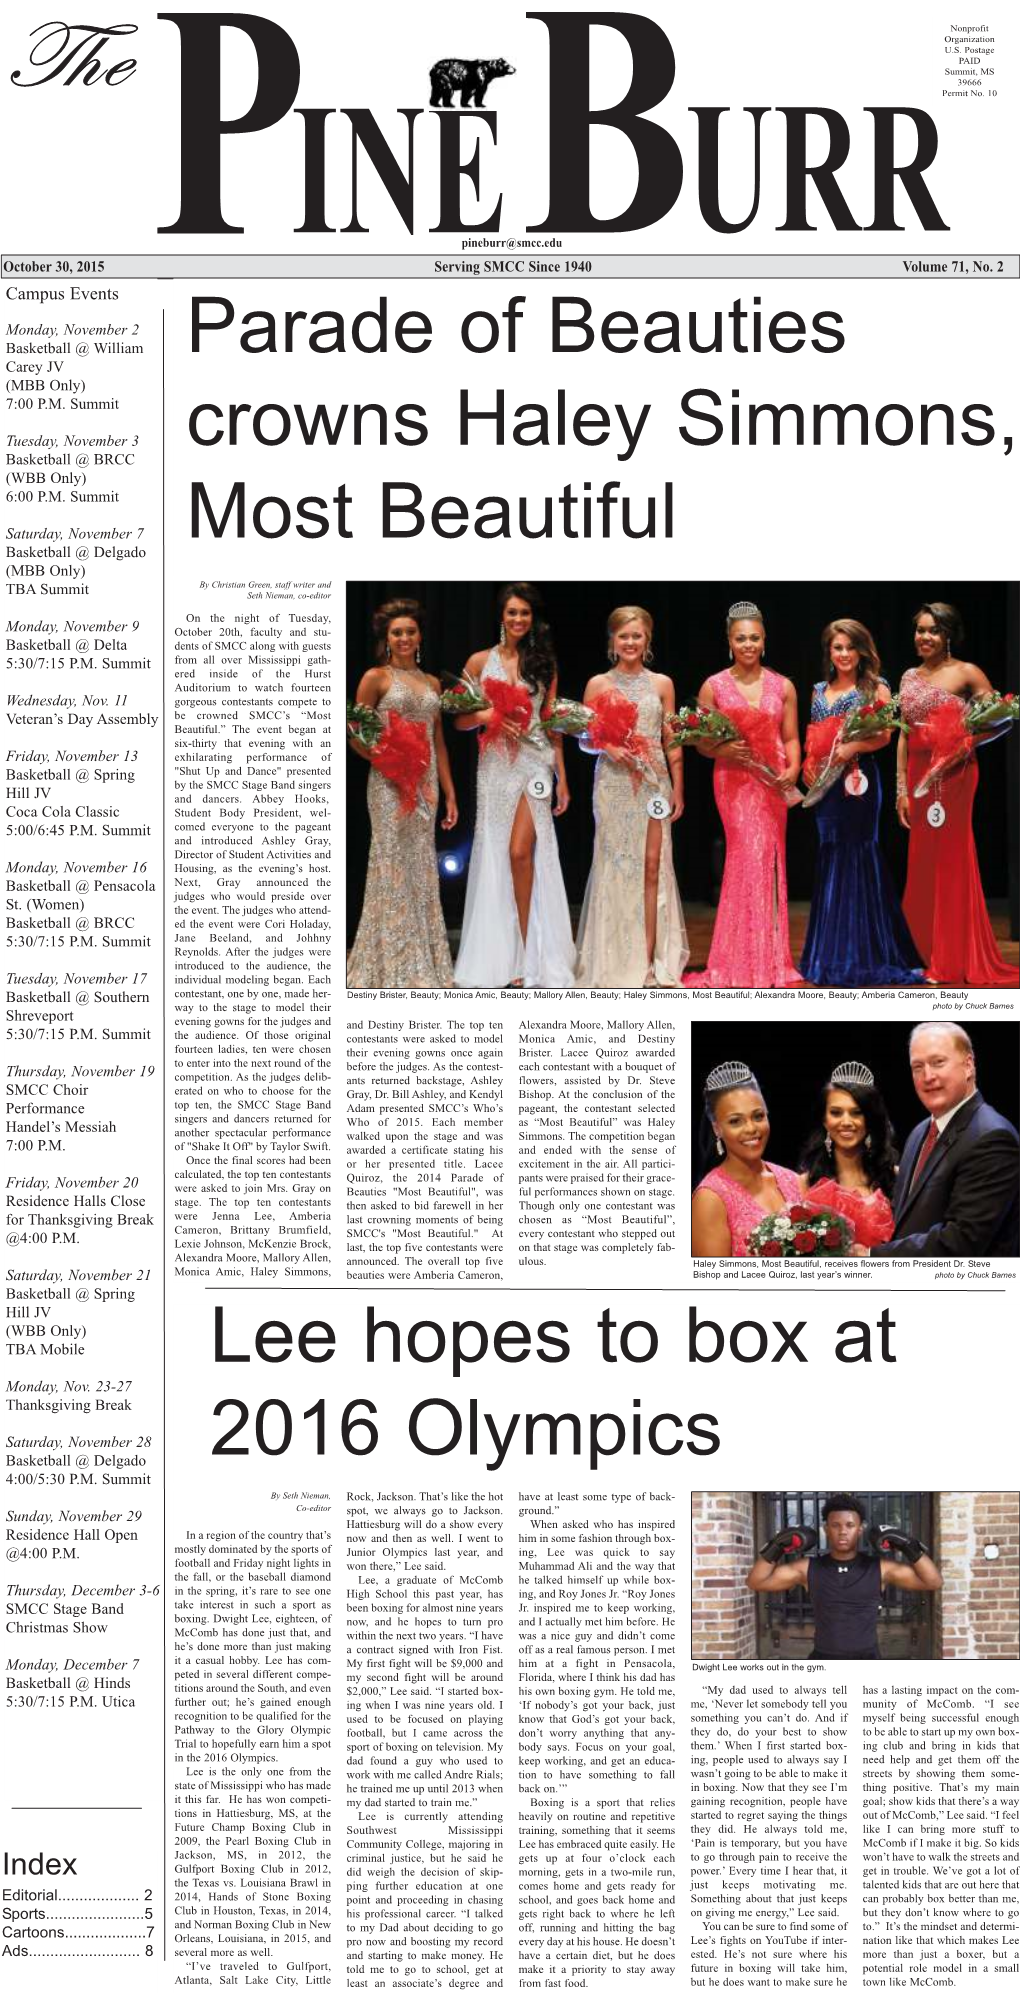 Parade of Beauties Crowns Haley Simmons, Most Beautiful Lee Hopes